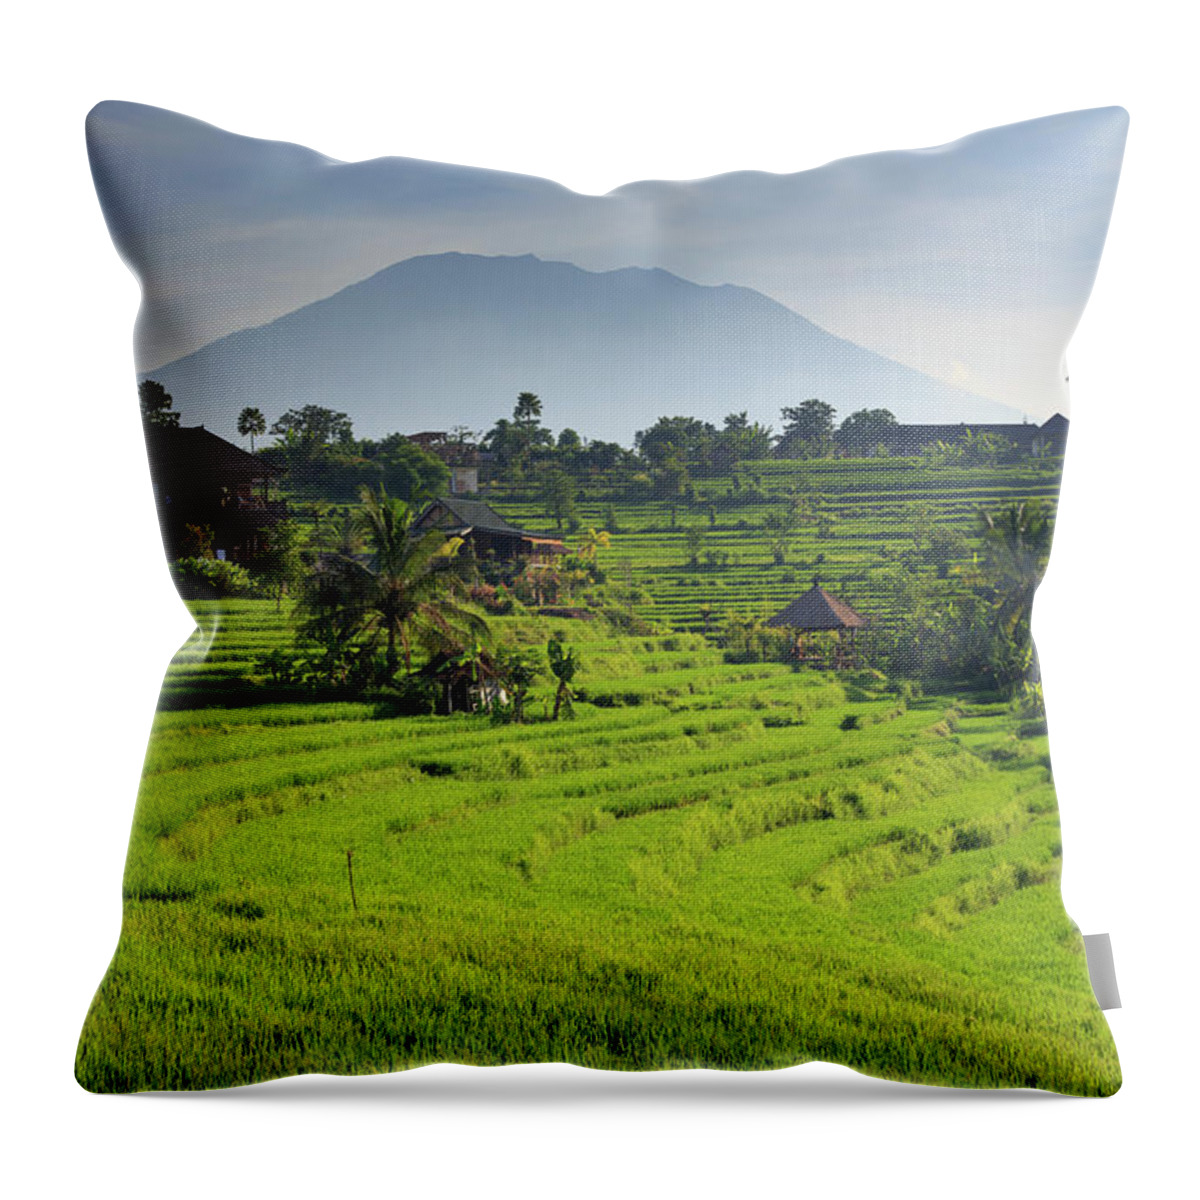 Scenics Throw Pillow featuring the photograph Indonesia, Bali, Rice Fields And #8 by Michele Falzone